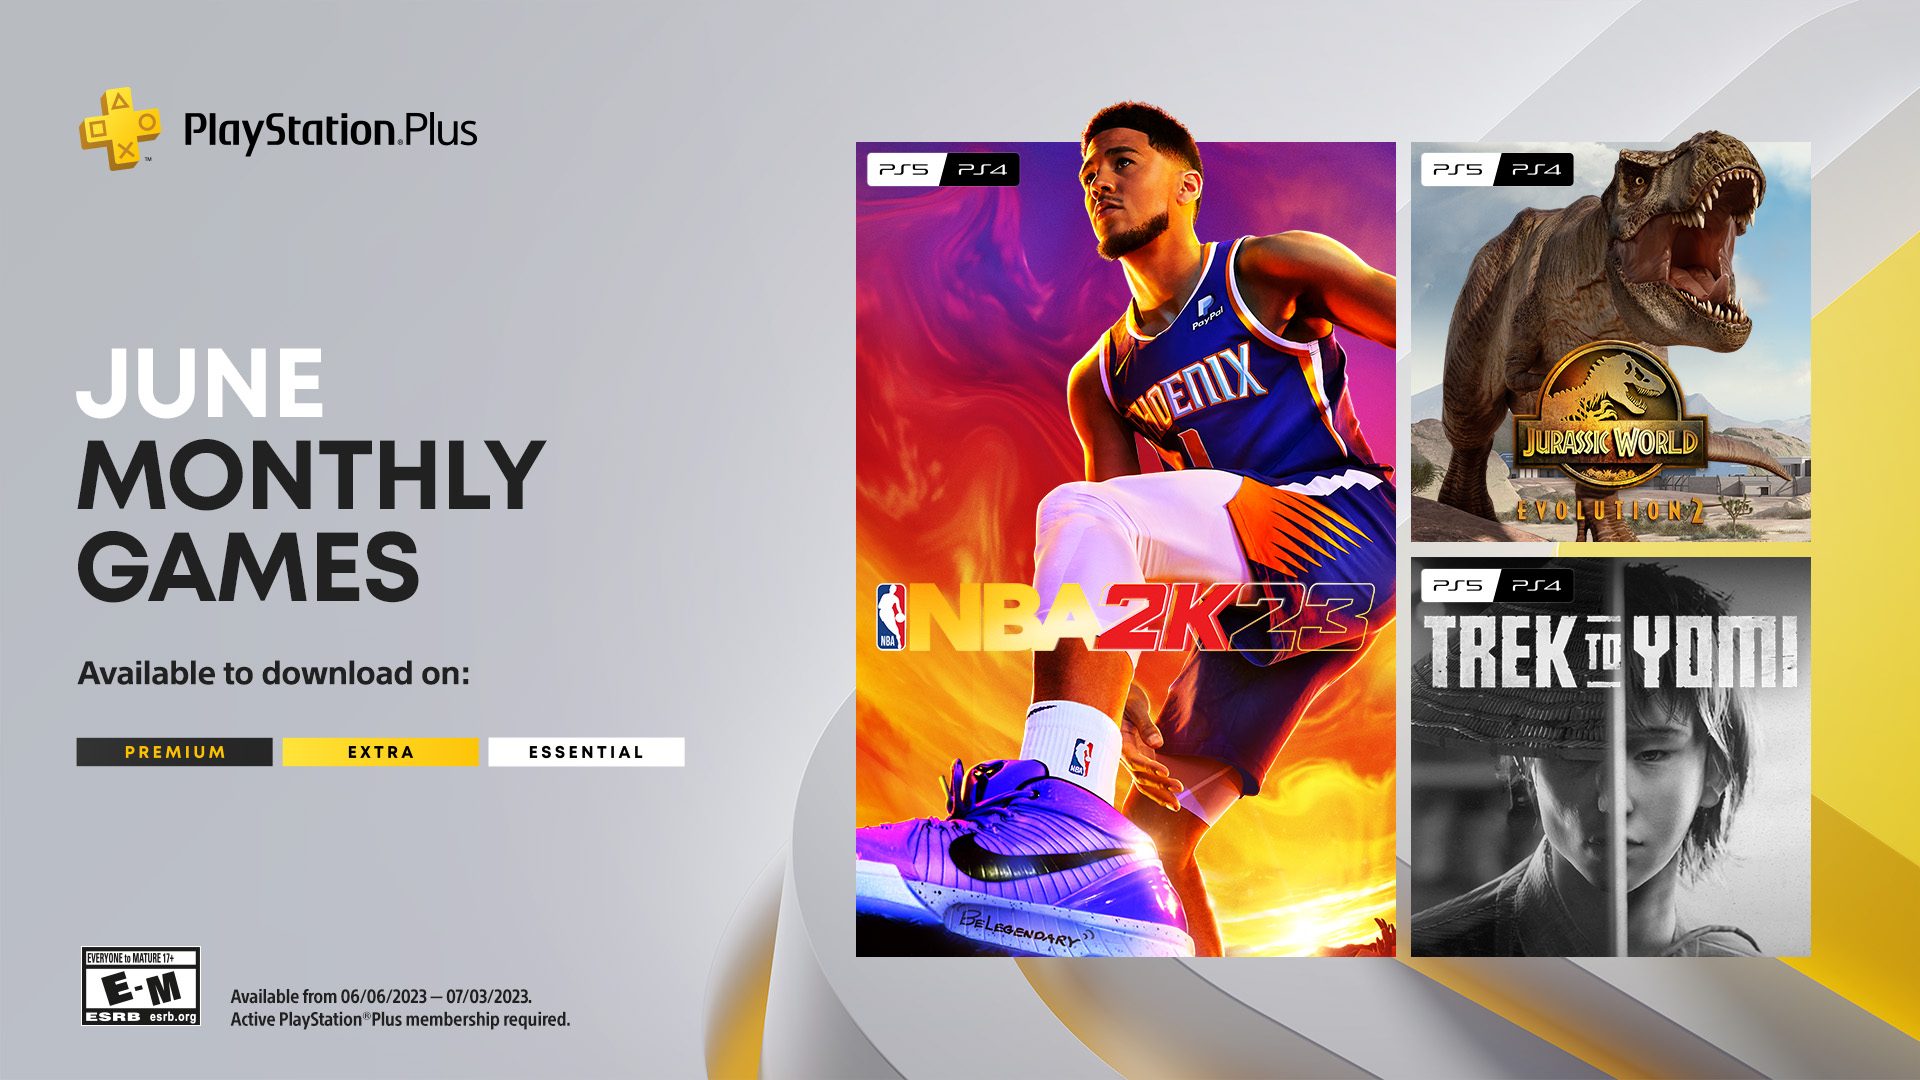 PlayStation Plus Monthly Games for June: NBA 2K23, Jurassic World Evolution 2 and Trek to Yomi